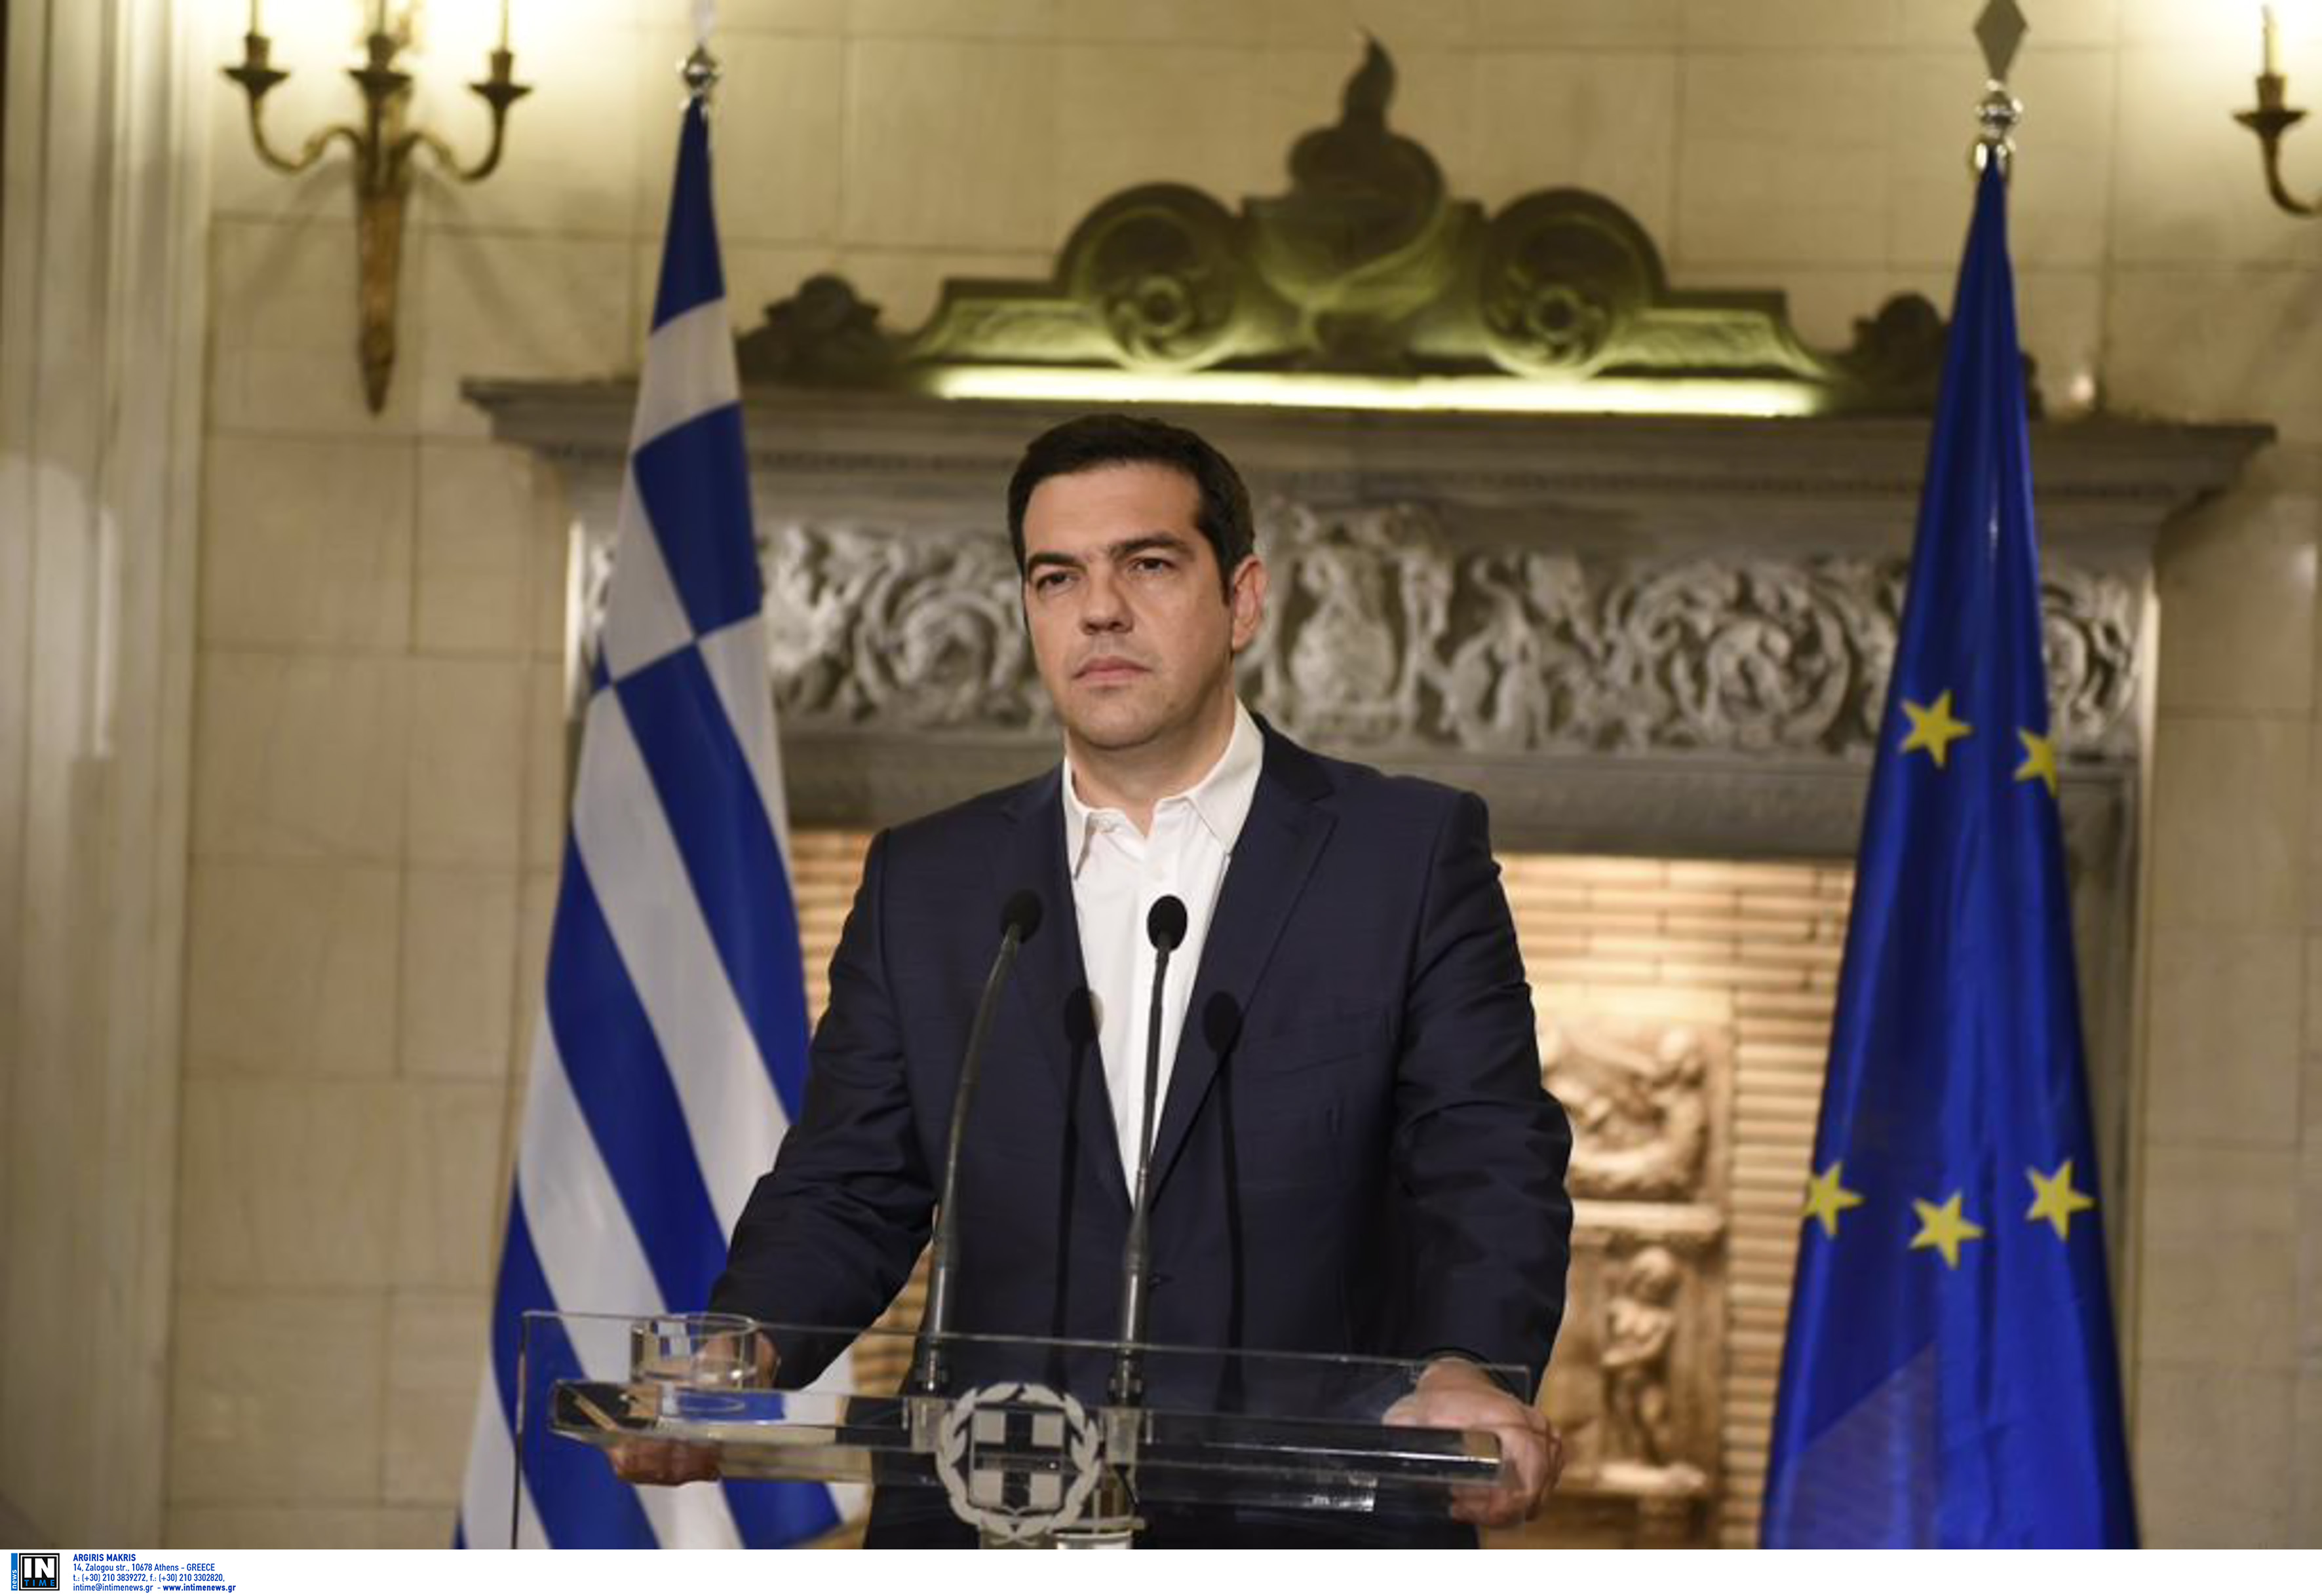 PM Alexis Tsipras: “The austerity policies must end”